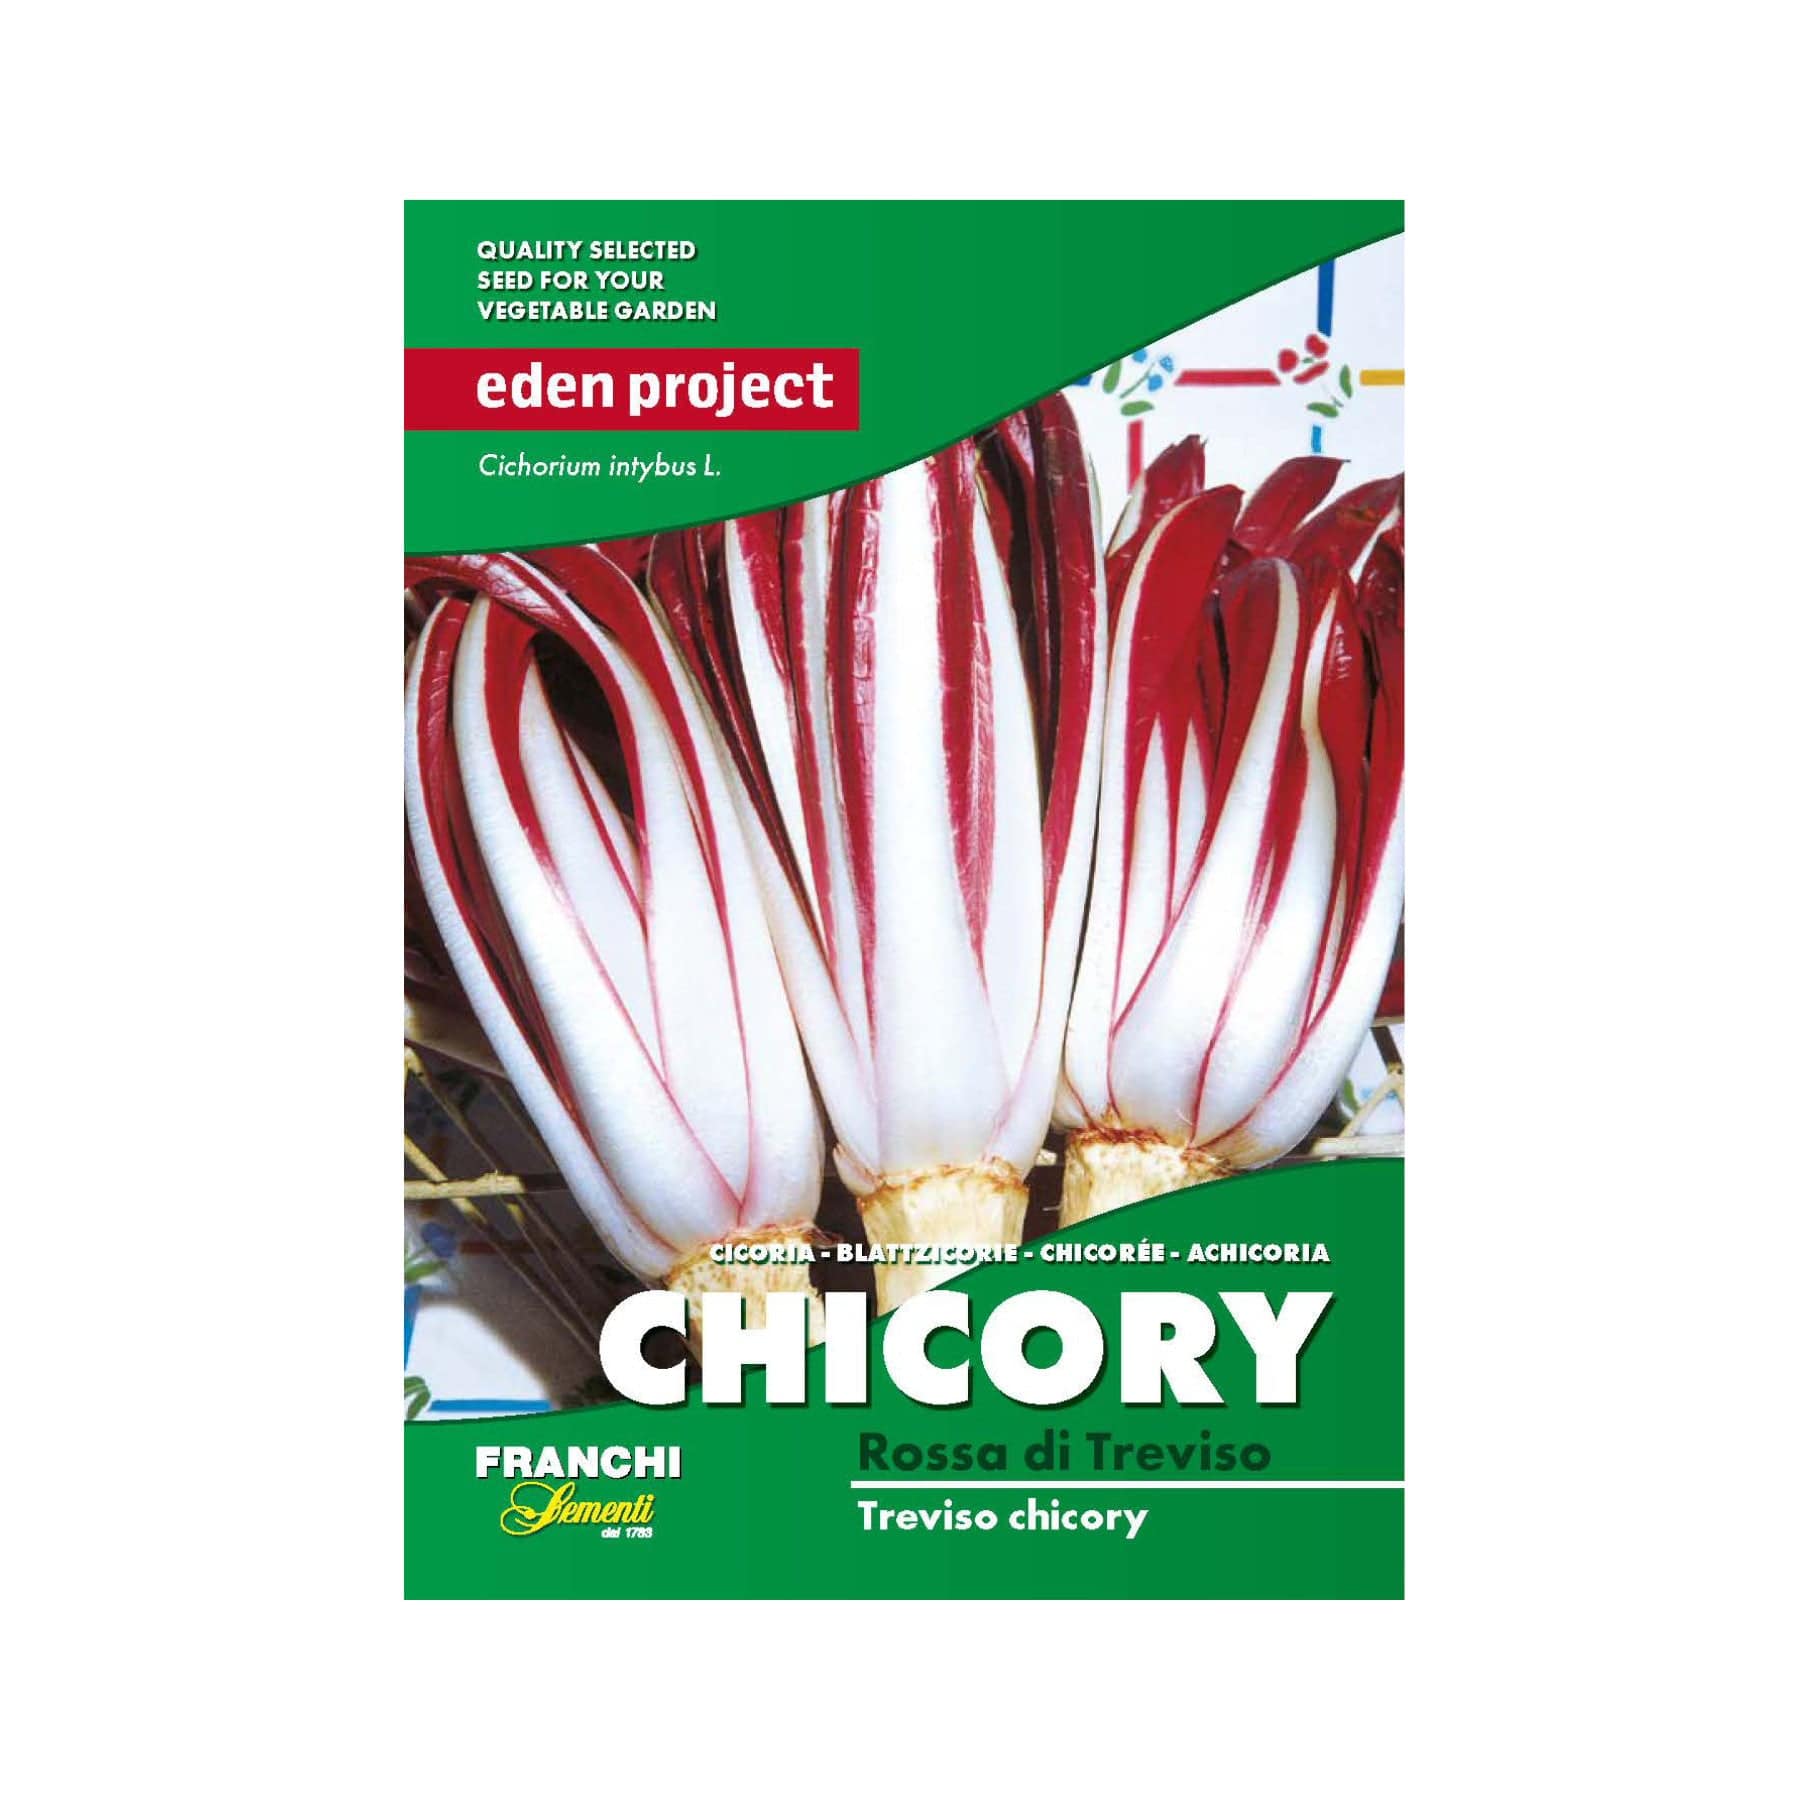 Eden Project Chicory seed packet, Rossa di Treviso variety, quality selected vegetable garden seeds by Franchi Sementi, red and white leafy chicory displayed.